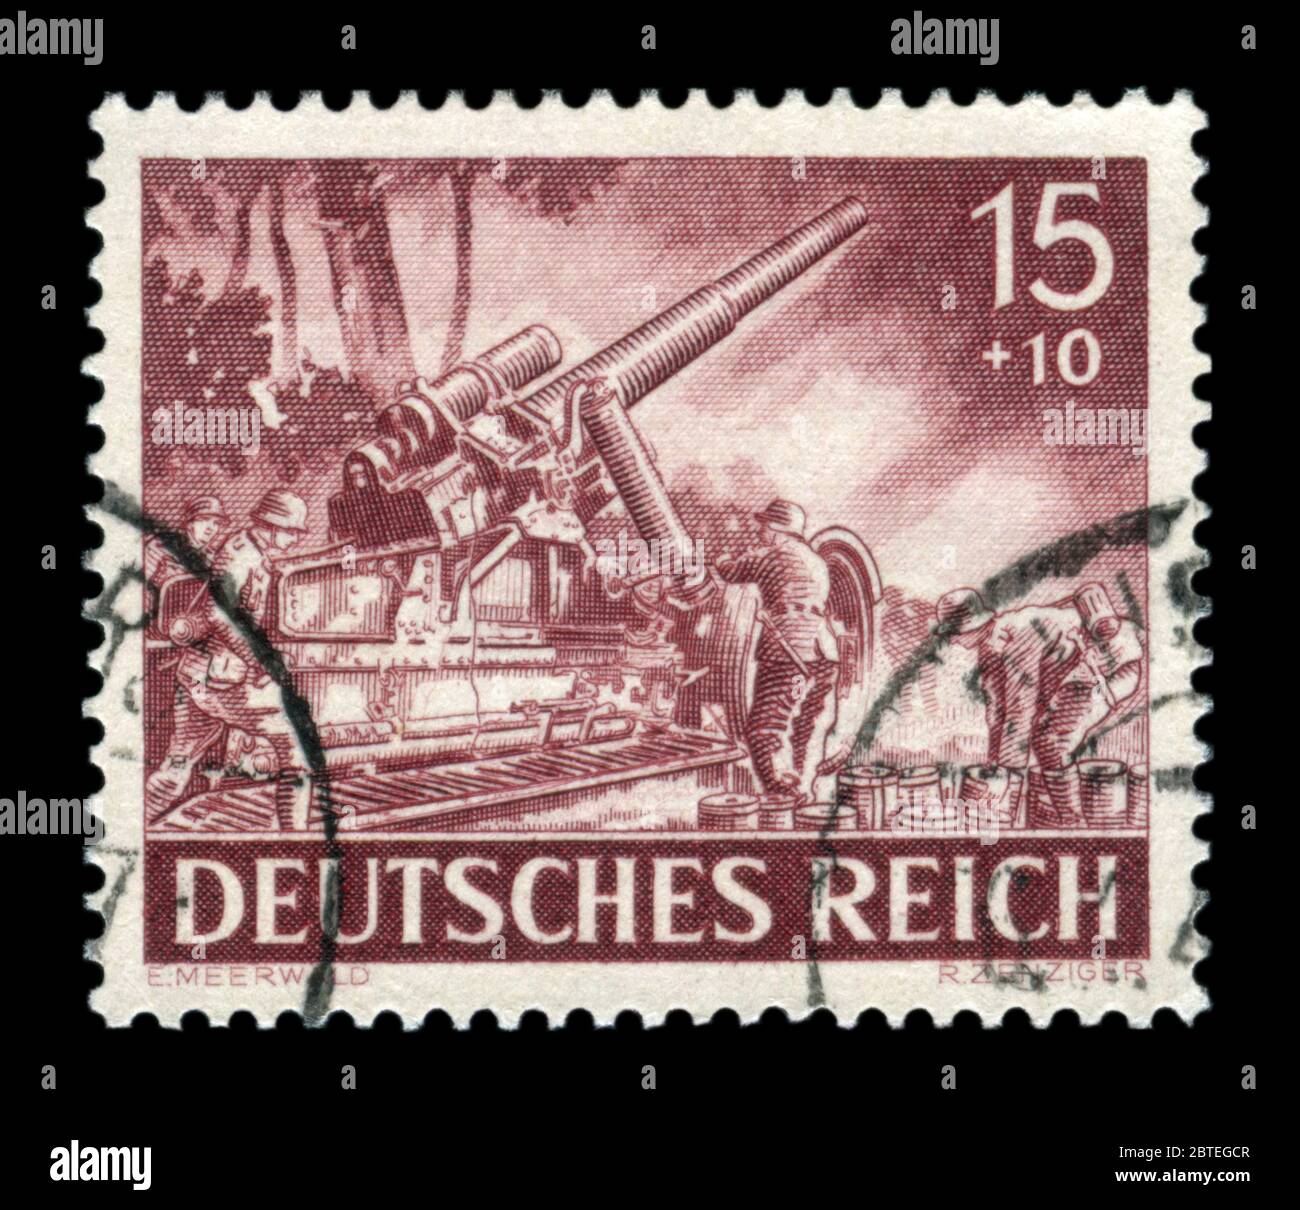 German historical stamp: 17 cm Cannon 18 on Heavy Howitzer Carriage, Artillery troops. The heavy artillery of the Wehrmacht, memorial day issue 1943 Stock Photo